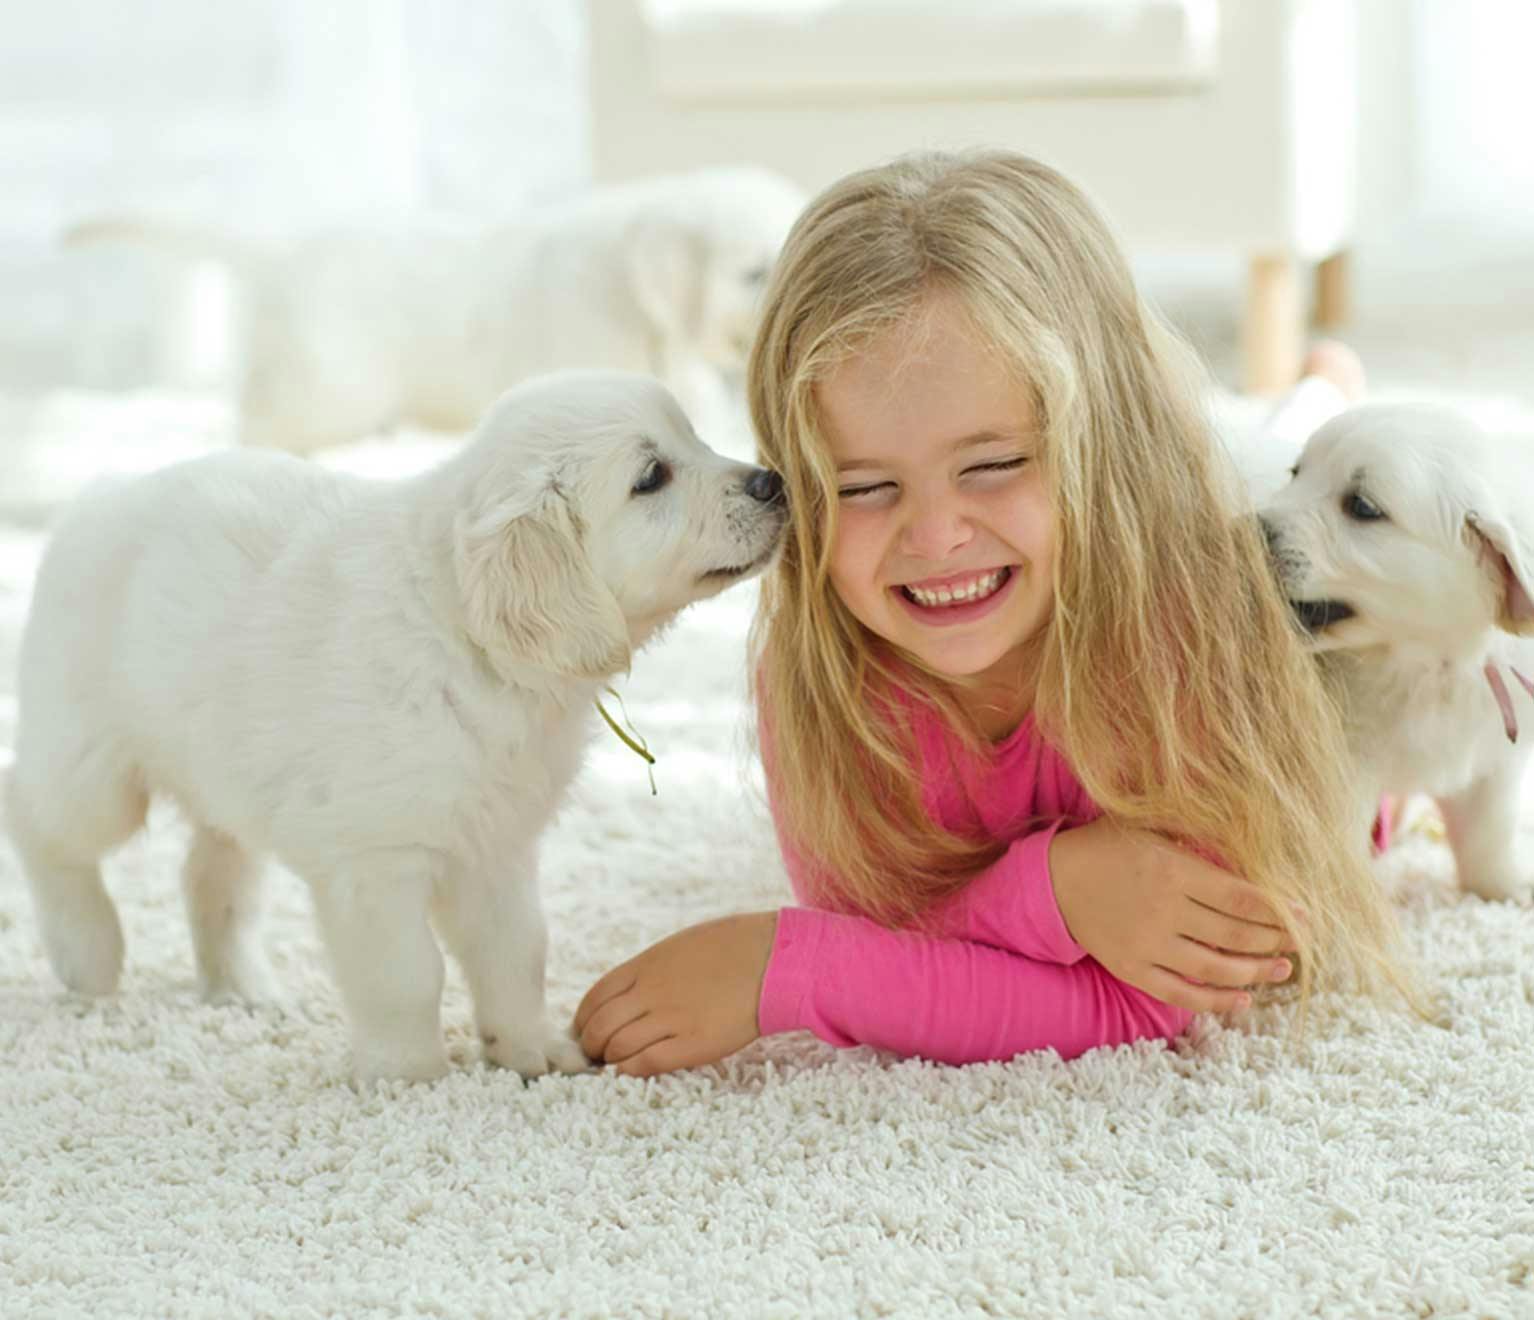 Image of a girl playing with two puppies.